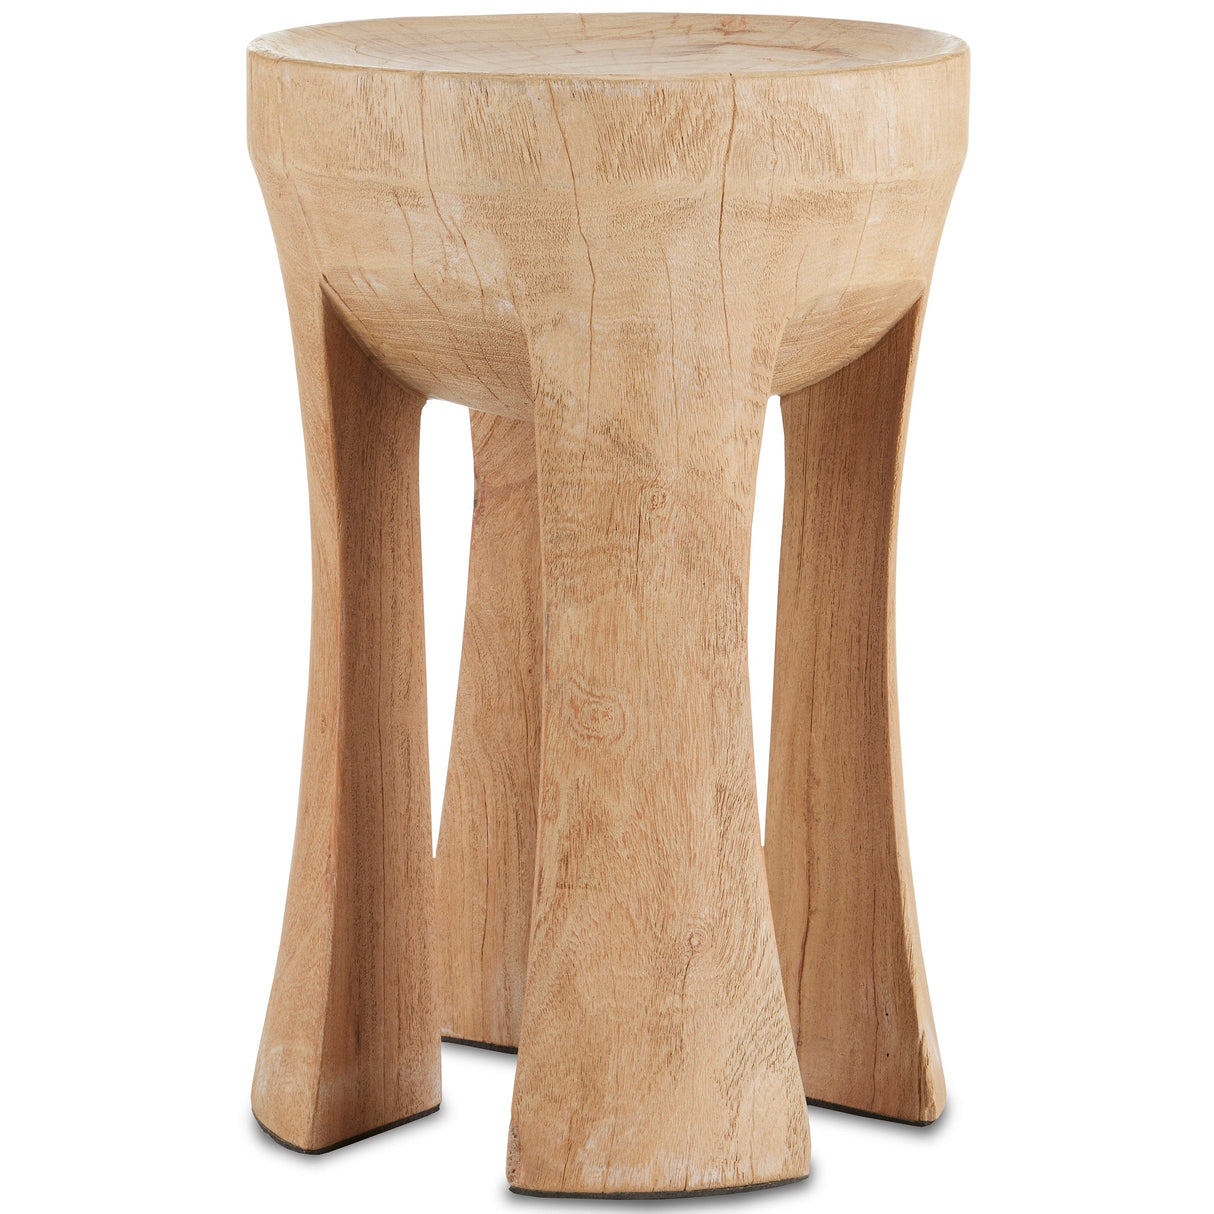 Currey & Company Pia Accent Table Furniture currey-co-3000-0220